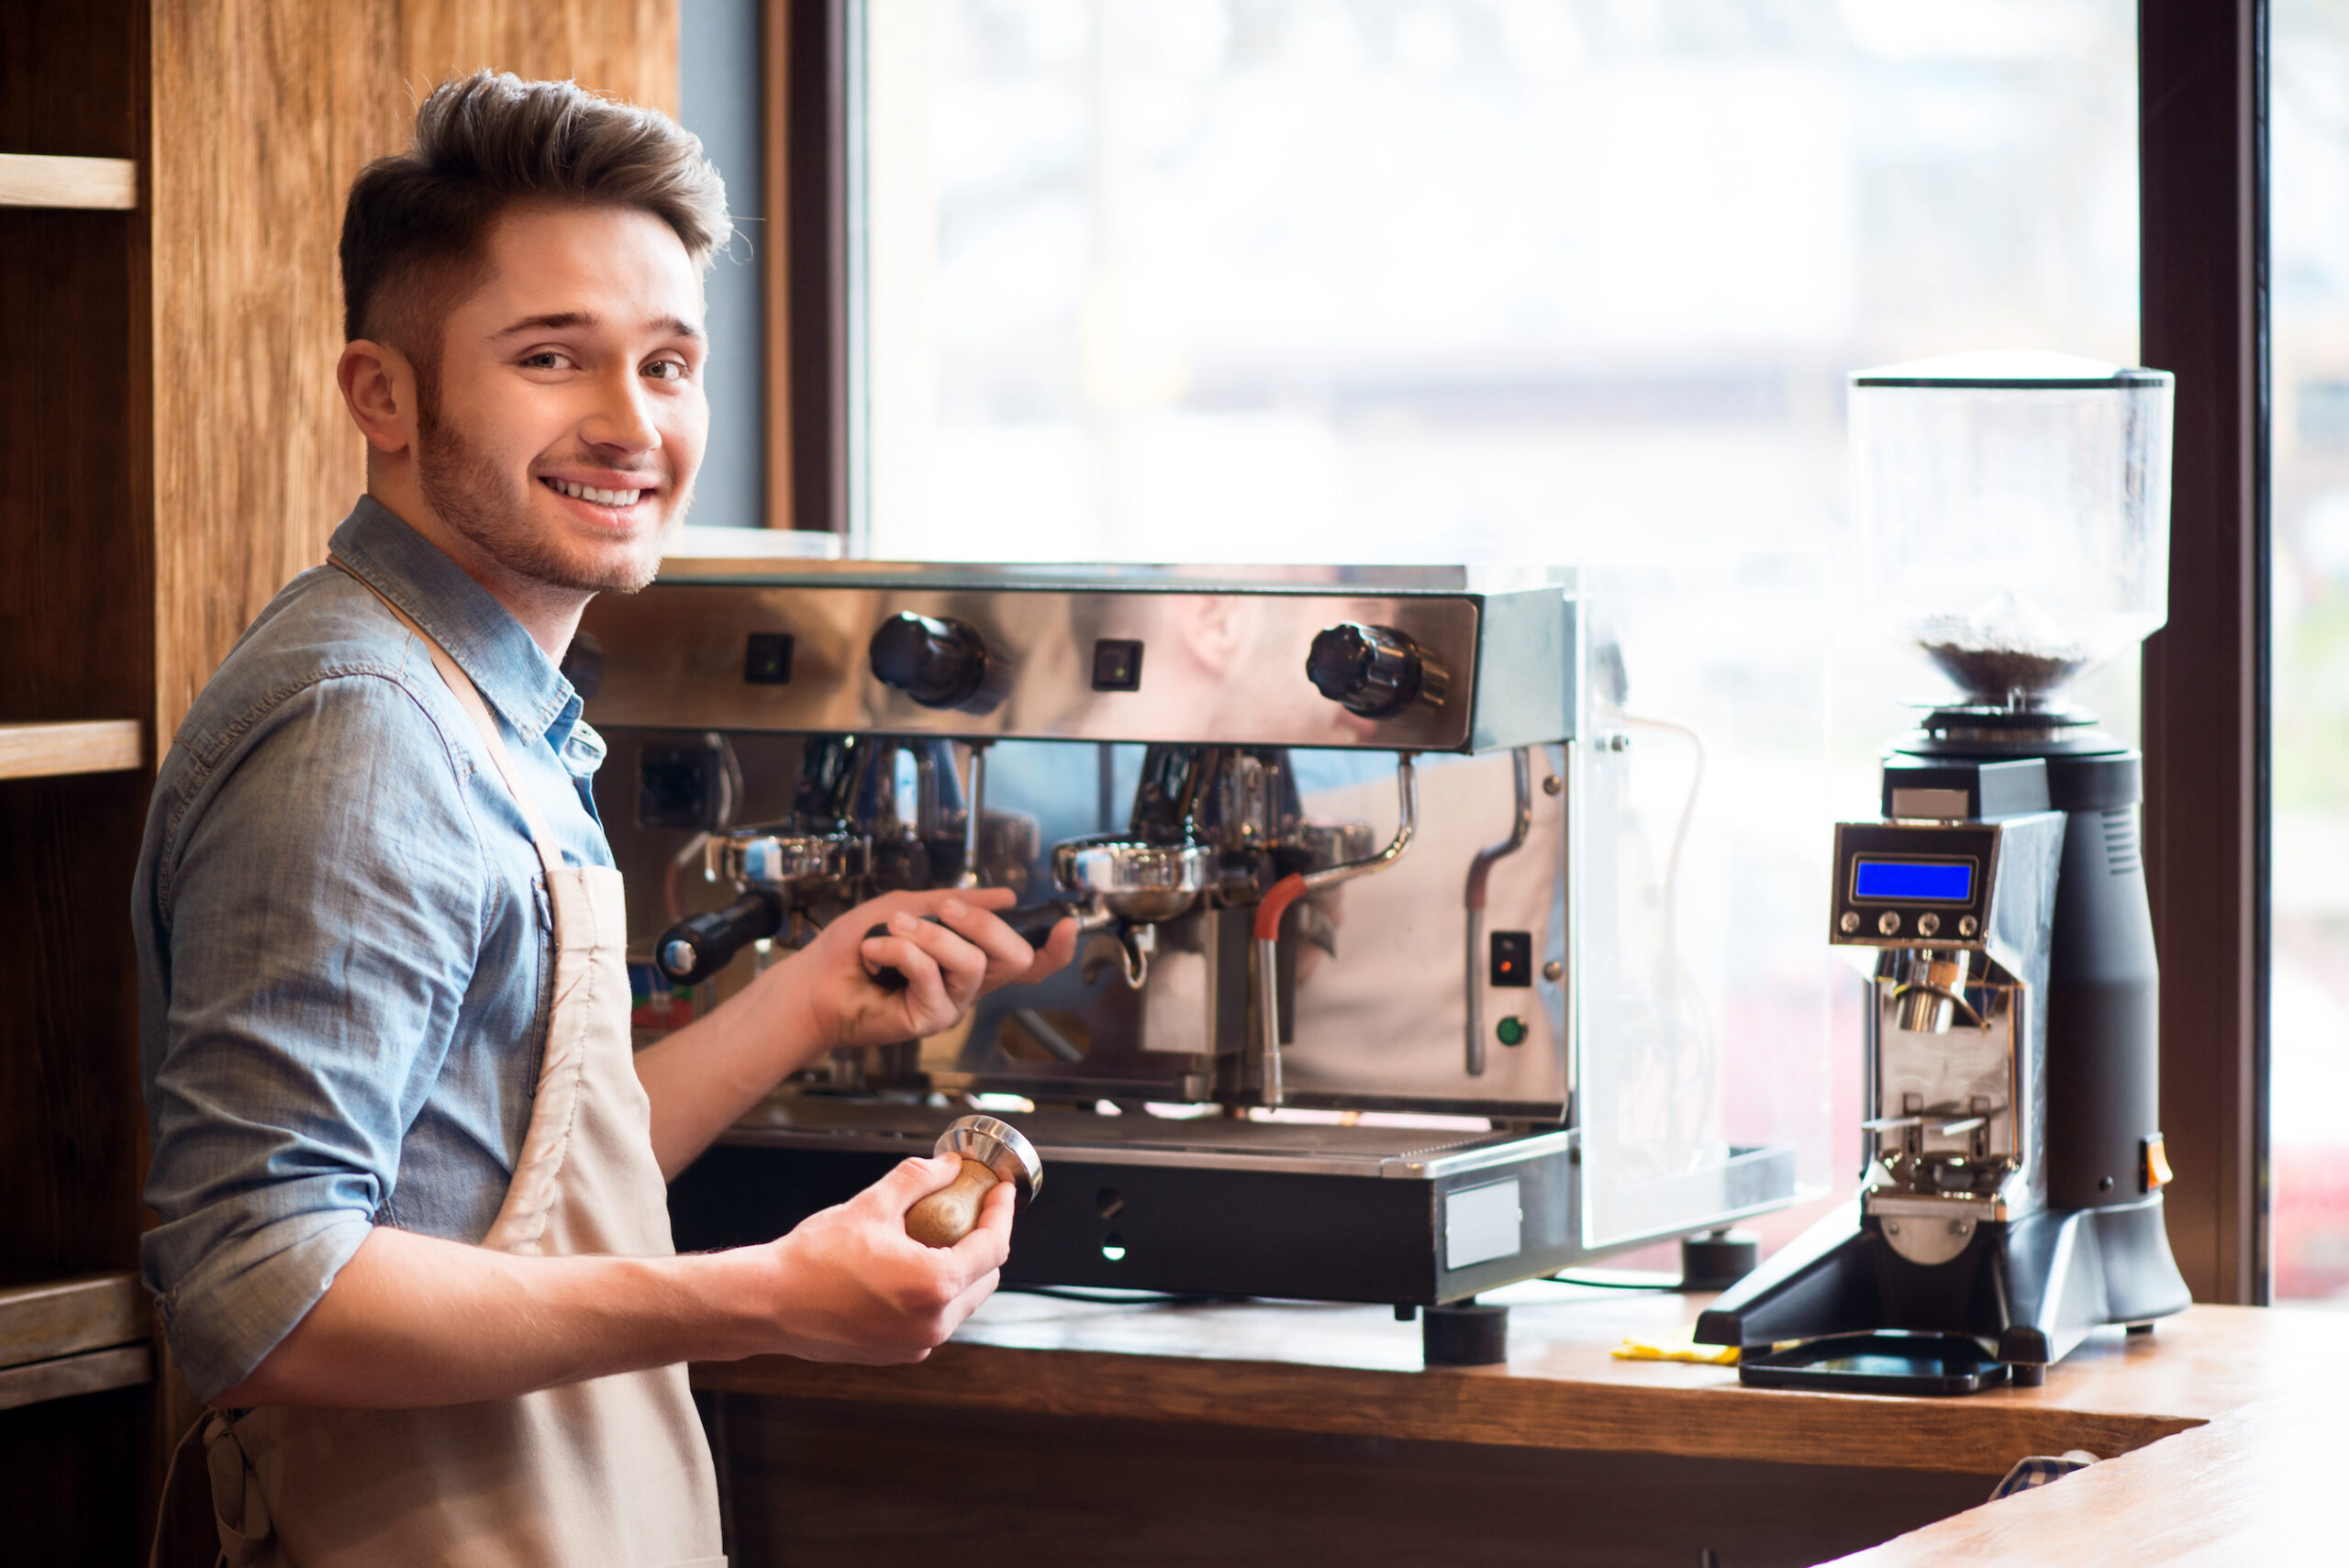 An enthusiastic barista smiling for the photo as he works the coffee machine.